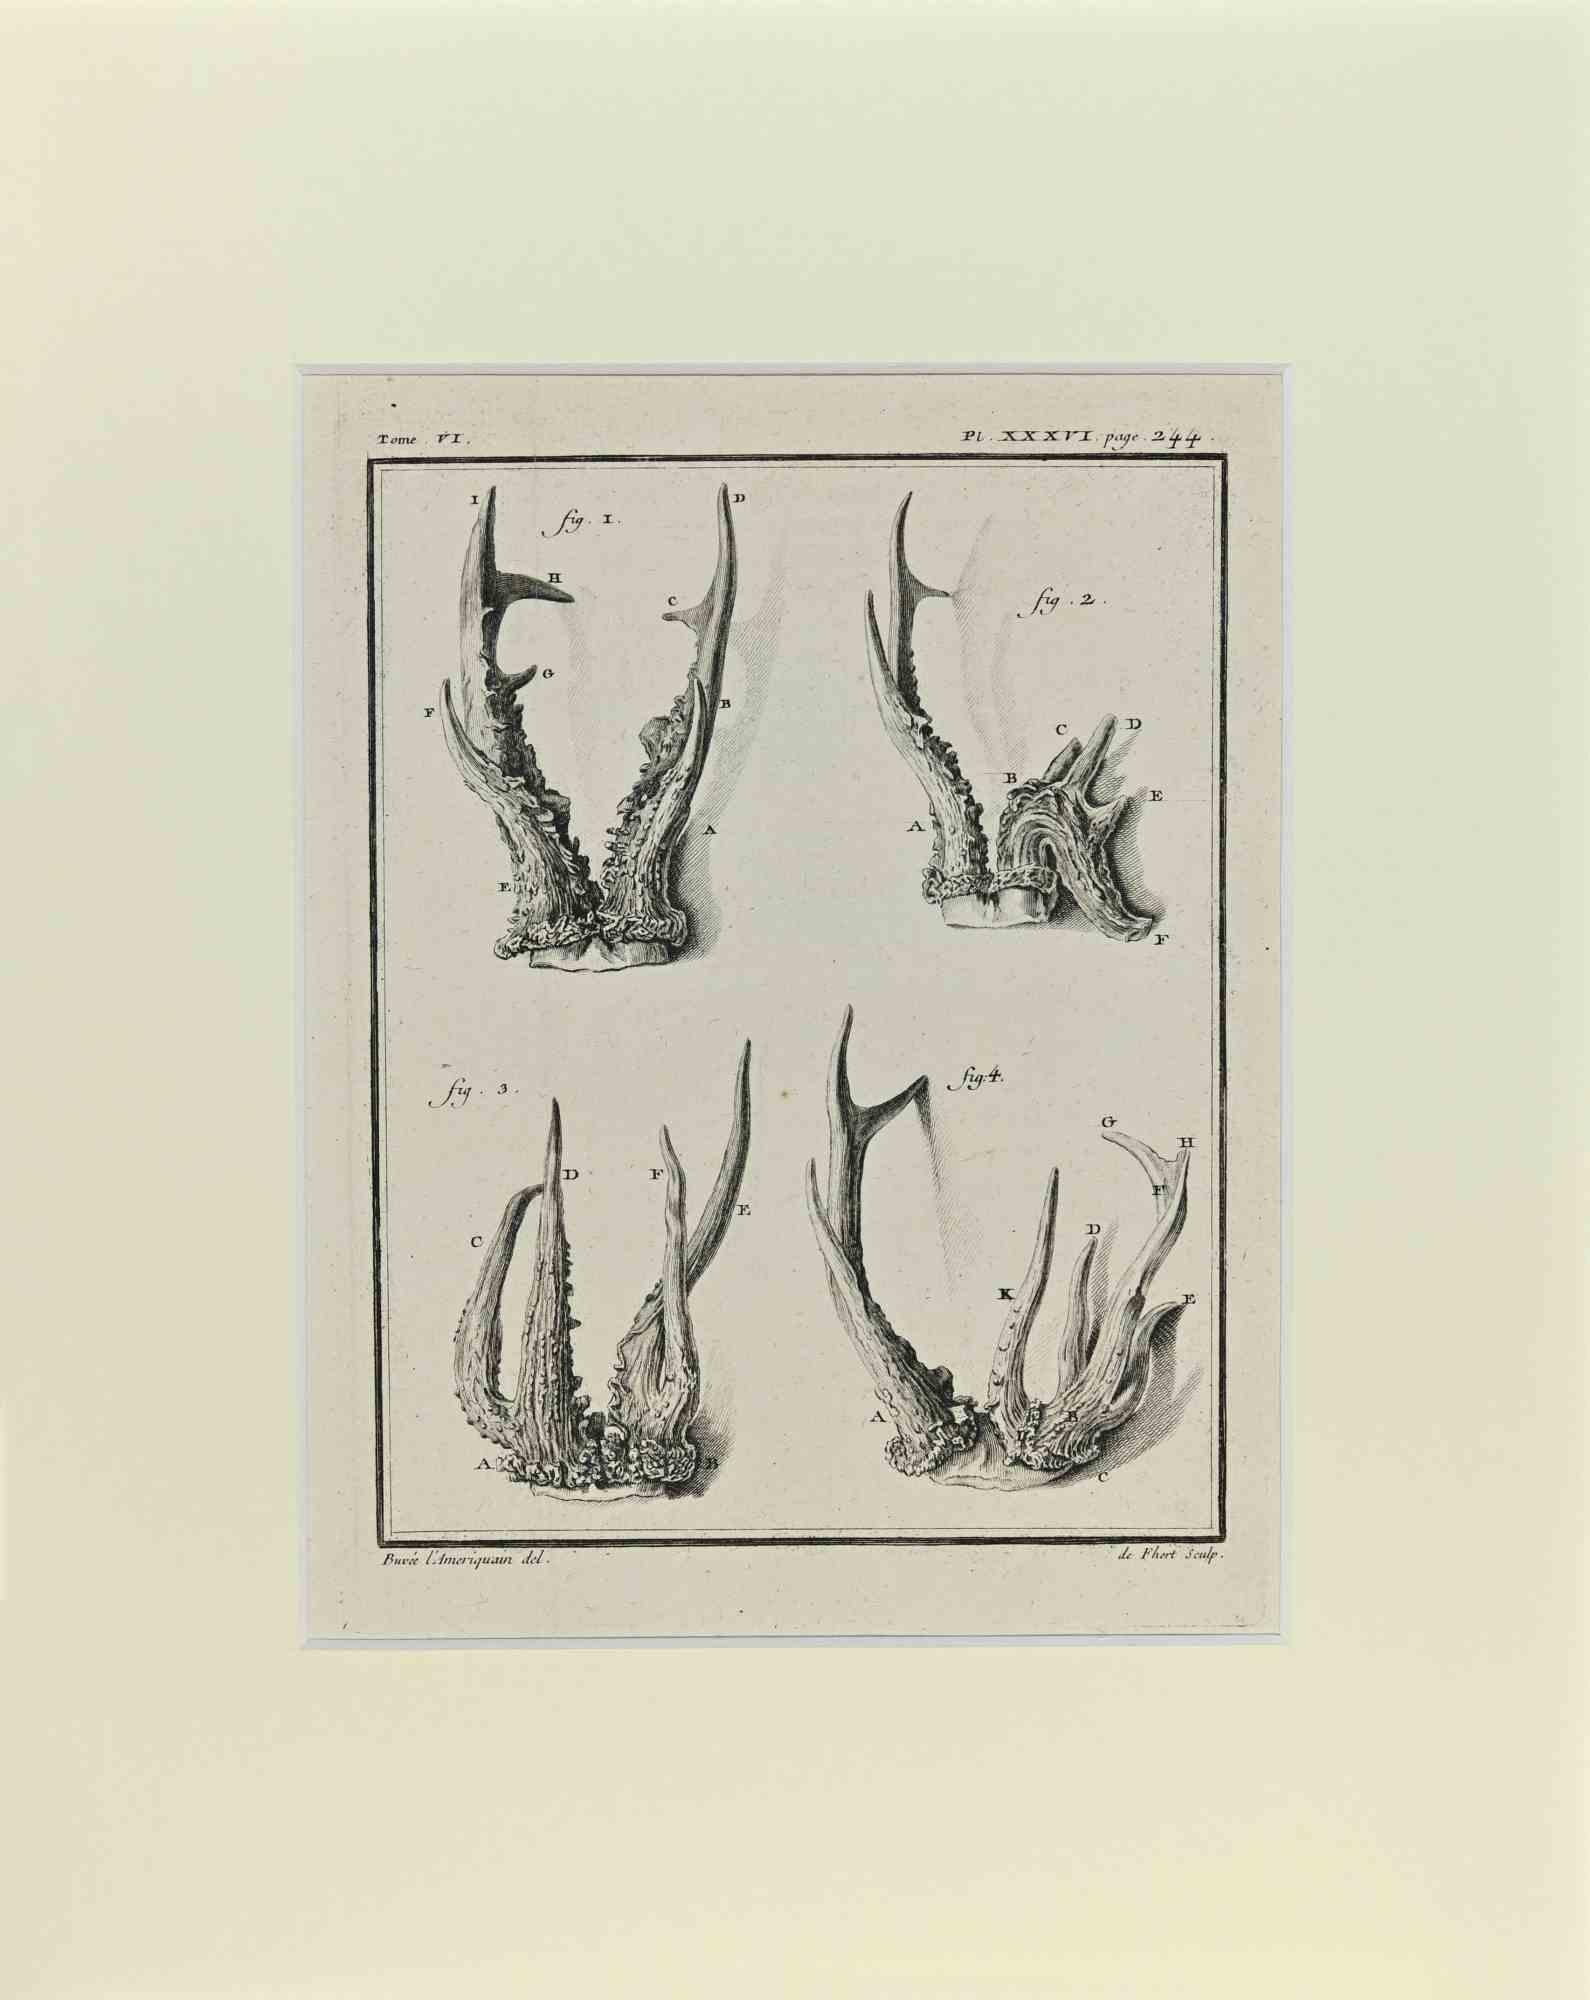 Deer horns is an artwork realized by Buvée l'Américain in 1771.  

Etching B./W. print  on ivory paper. Signed on  plate on the lower left margin.

The work is glued on cardboard. Total dimensions: 35x28 cm.

The artwork belongs to the suite